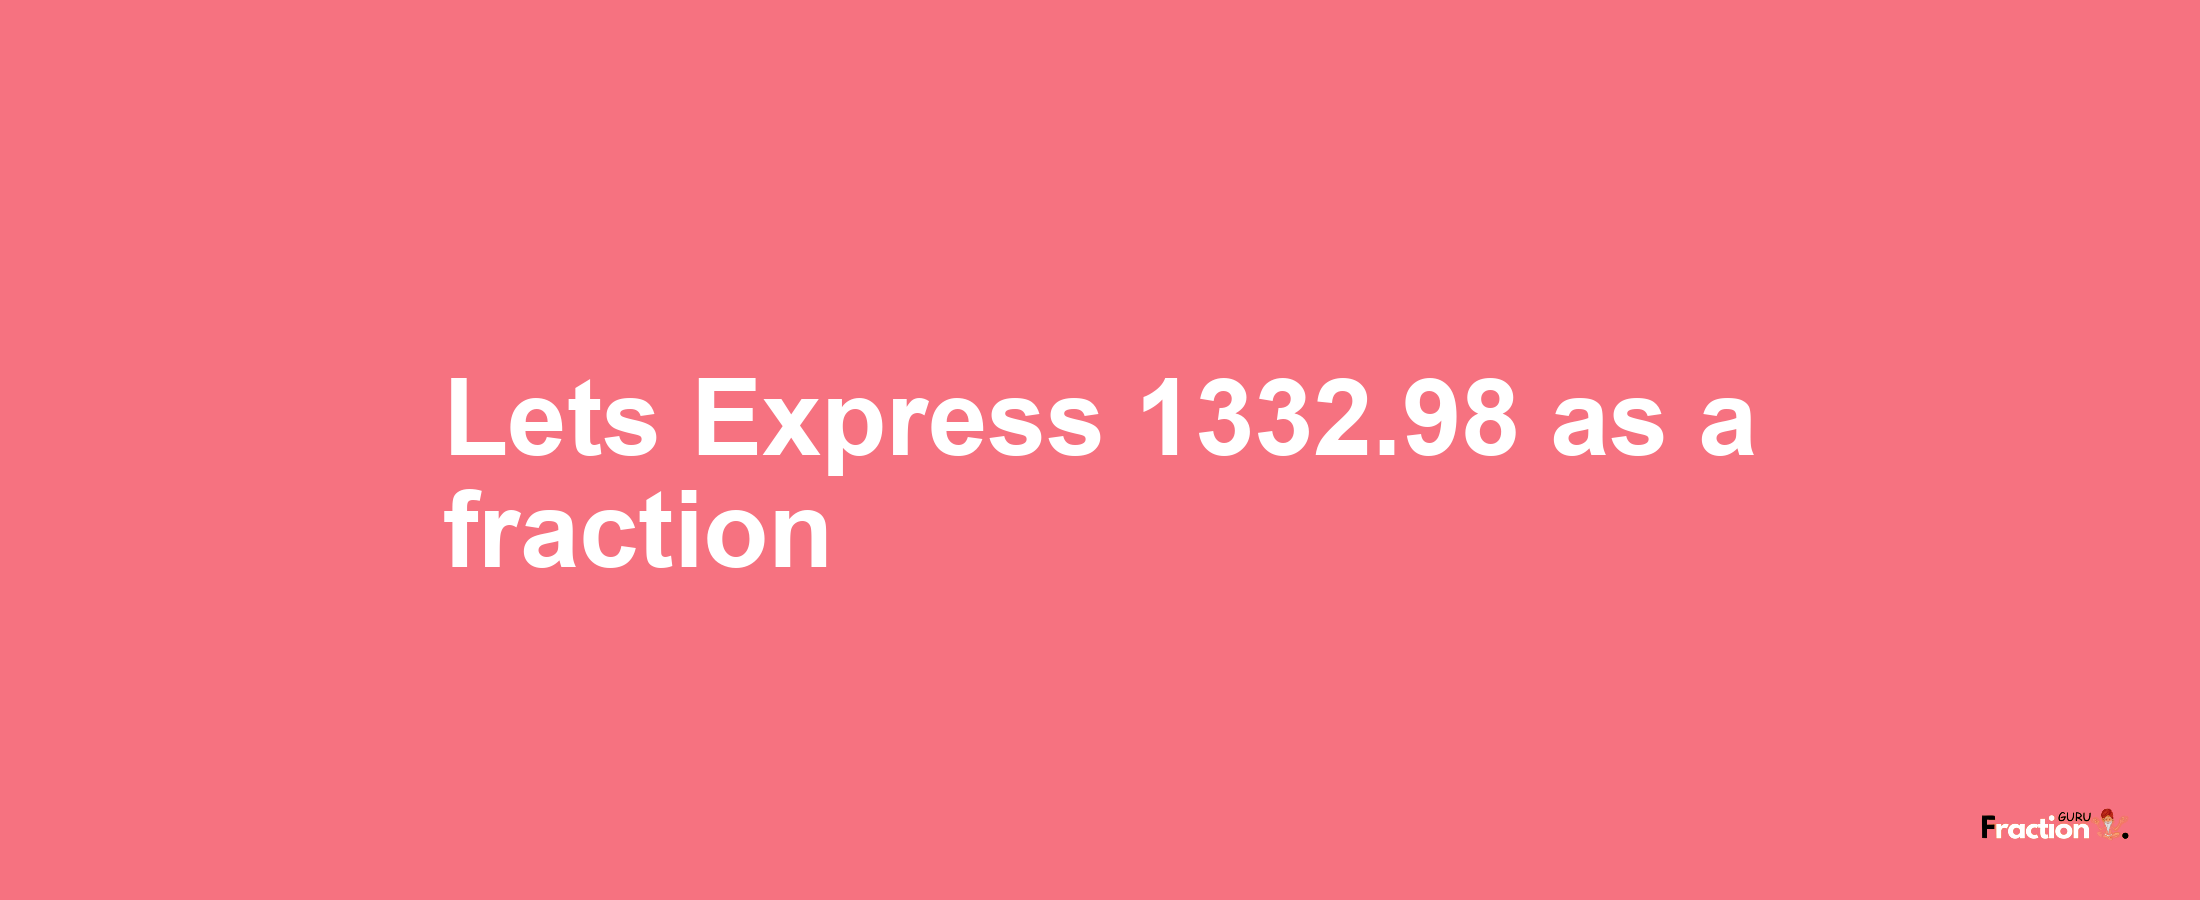 Lets Express 1332.98 as afraction